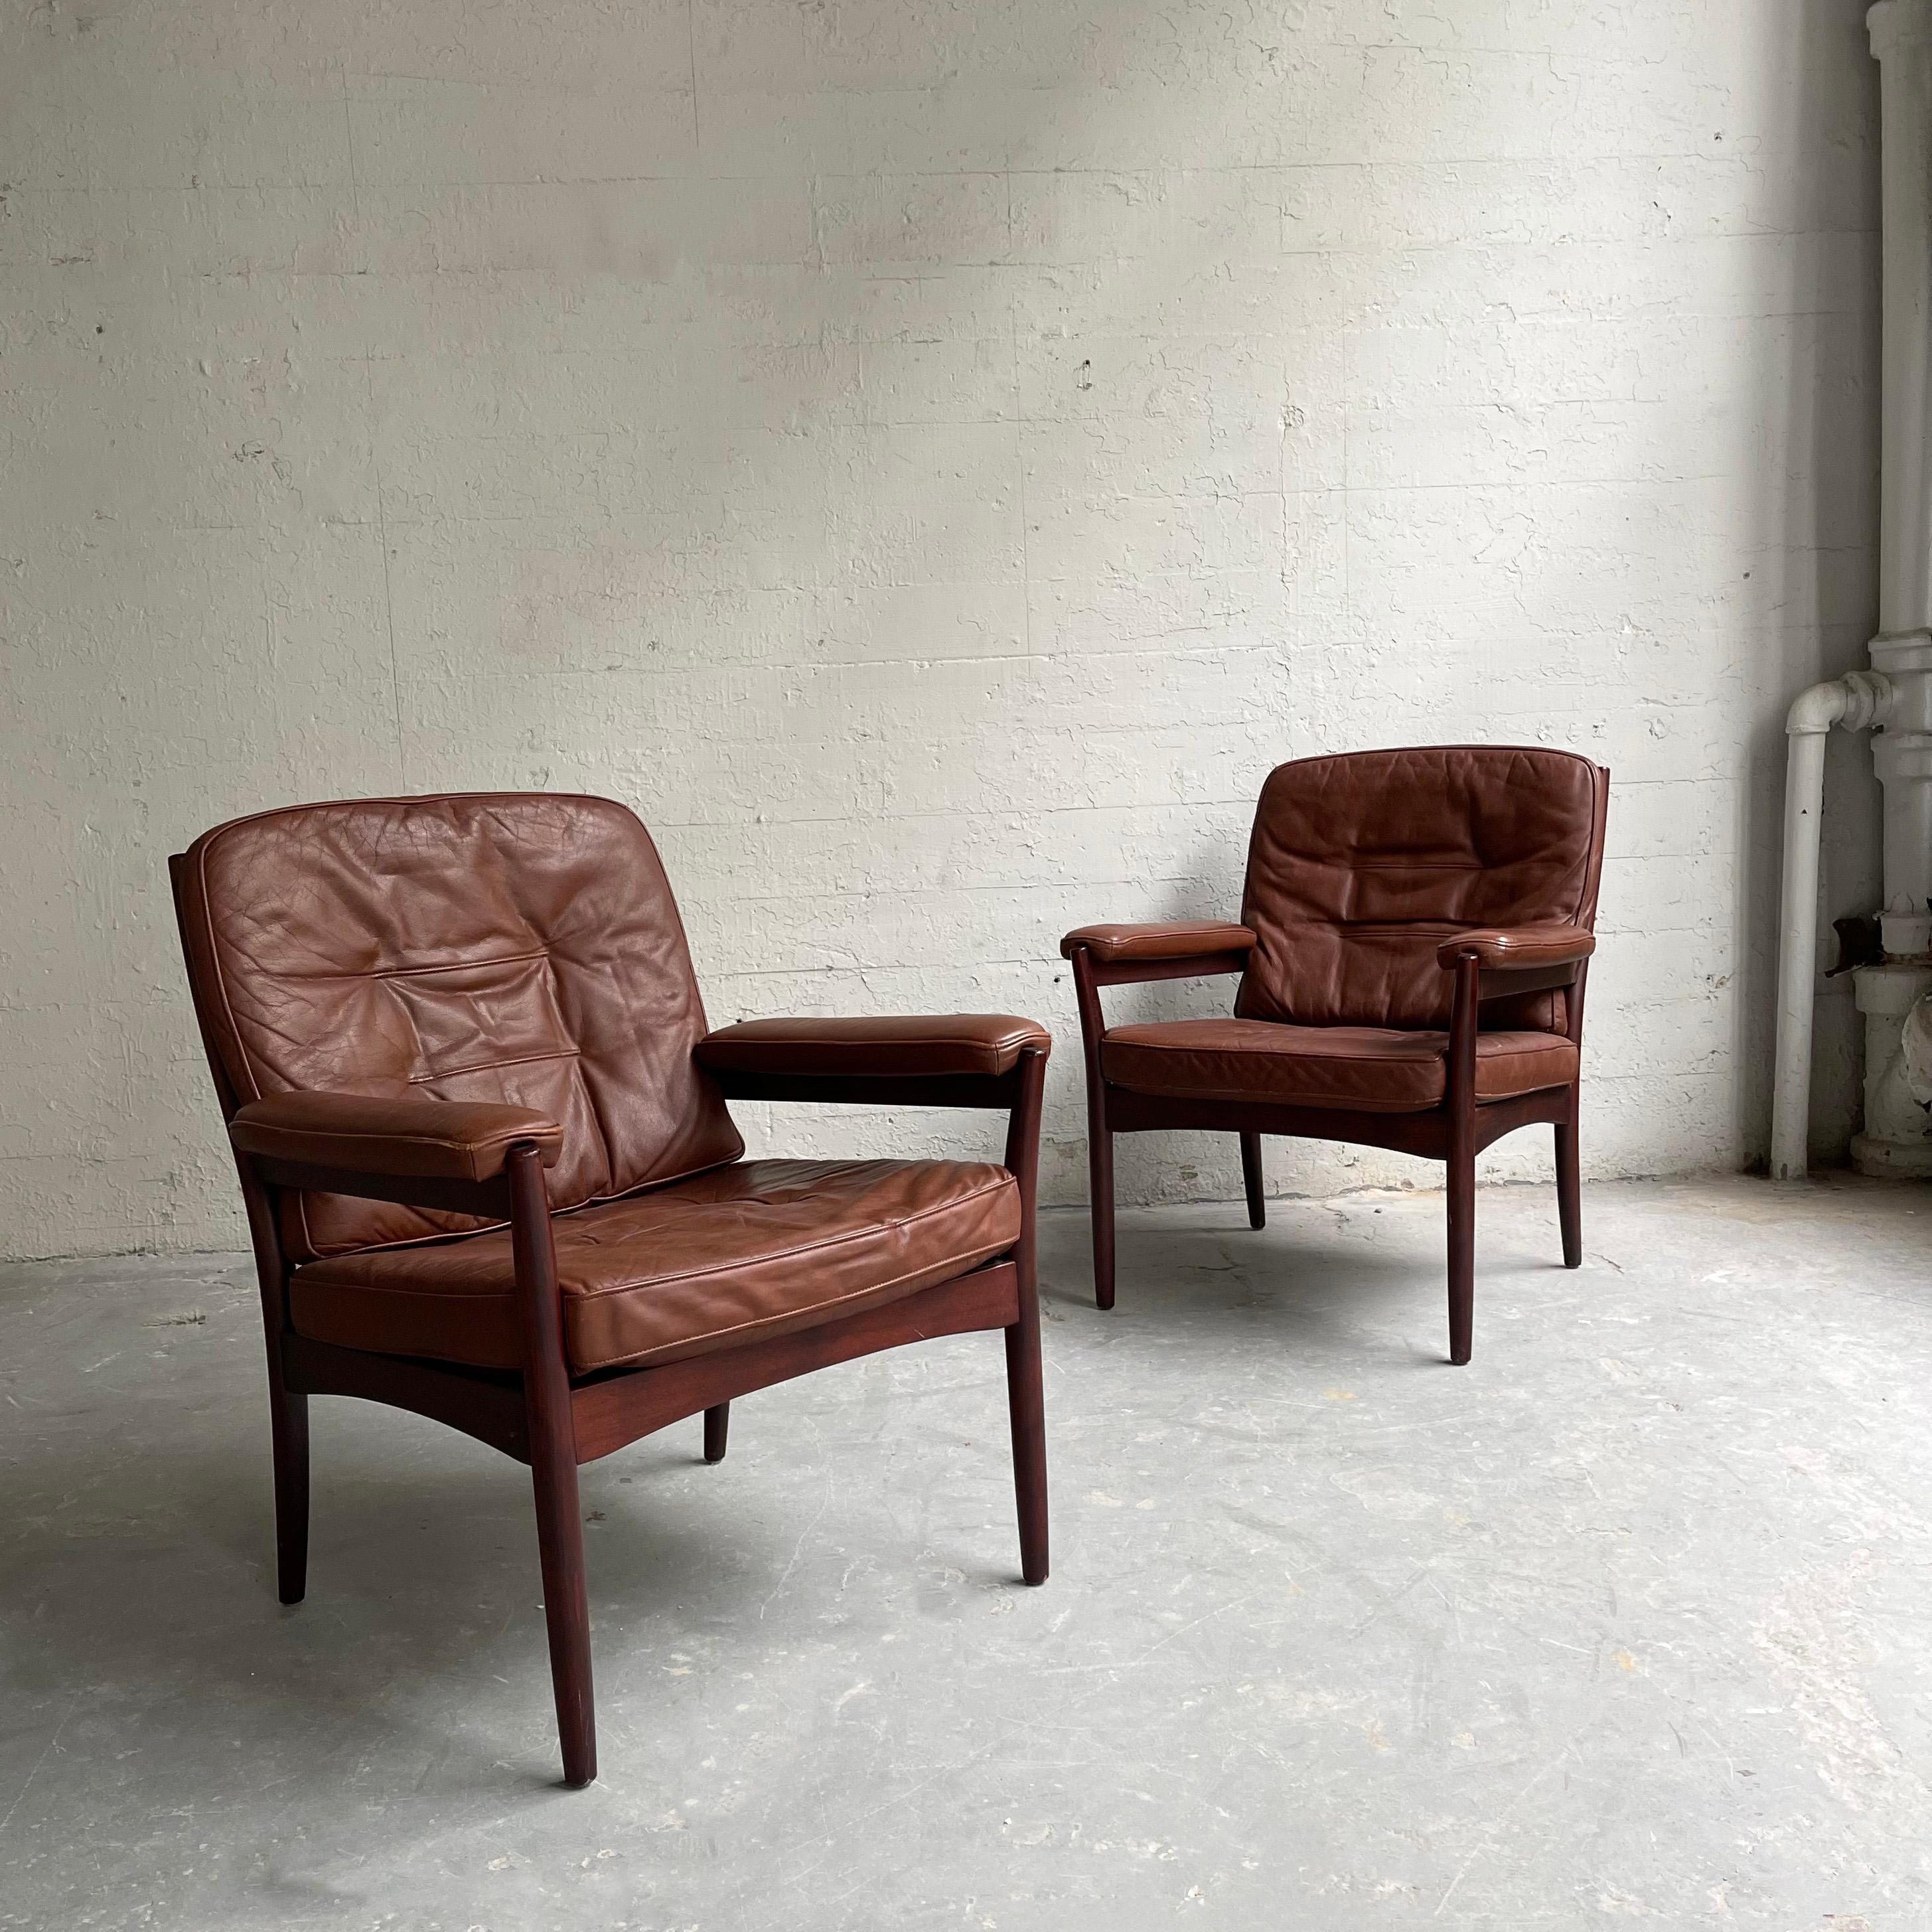 Pair of Scandinavian Modern armchairs by Göte Möbel Sweden, feature rosewood frames with patinated, cognac leather upholstery.